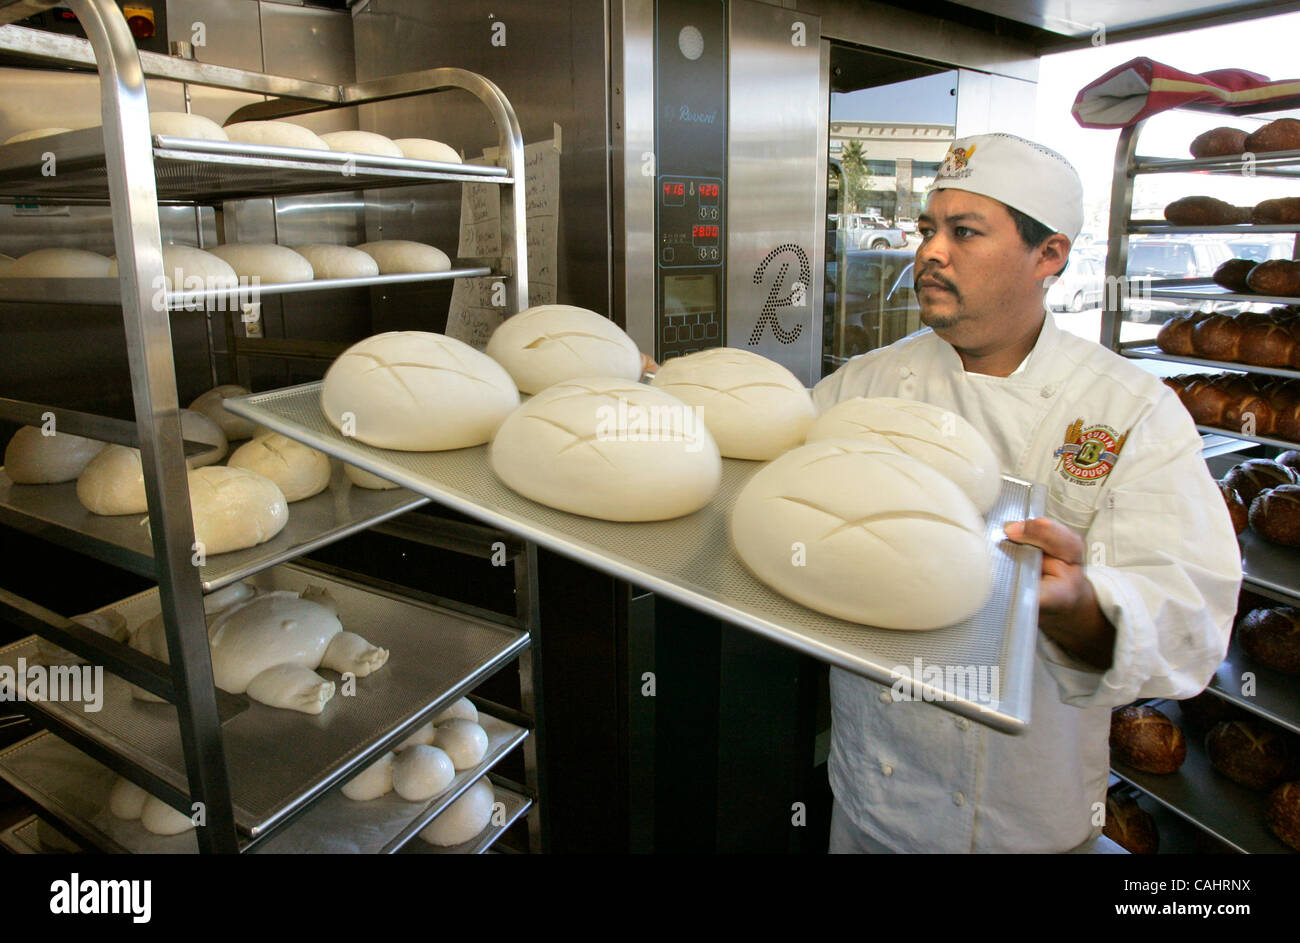 December 14, 2007, San Marcos, California, USA Baker ANDREAS HERRERA places a tray of sourdough bread onto a rack at the new Boudin SF location going in at the Grand Plaza shopping center Mandatory Credit: photo by Charlie Neuman, San Diego Union-Tribune/Zuma Press. copyright 2007 San Diego Union-Tr Stock Photo